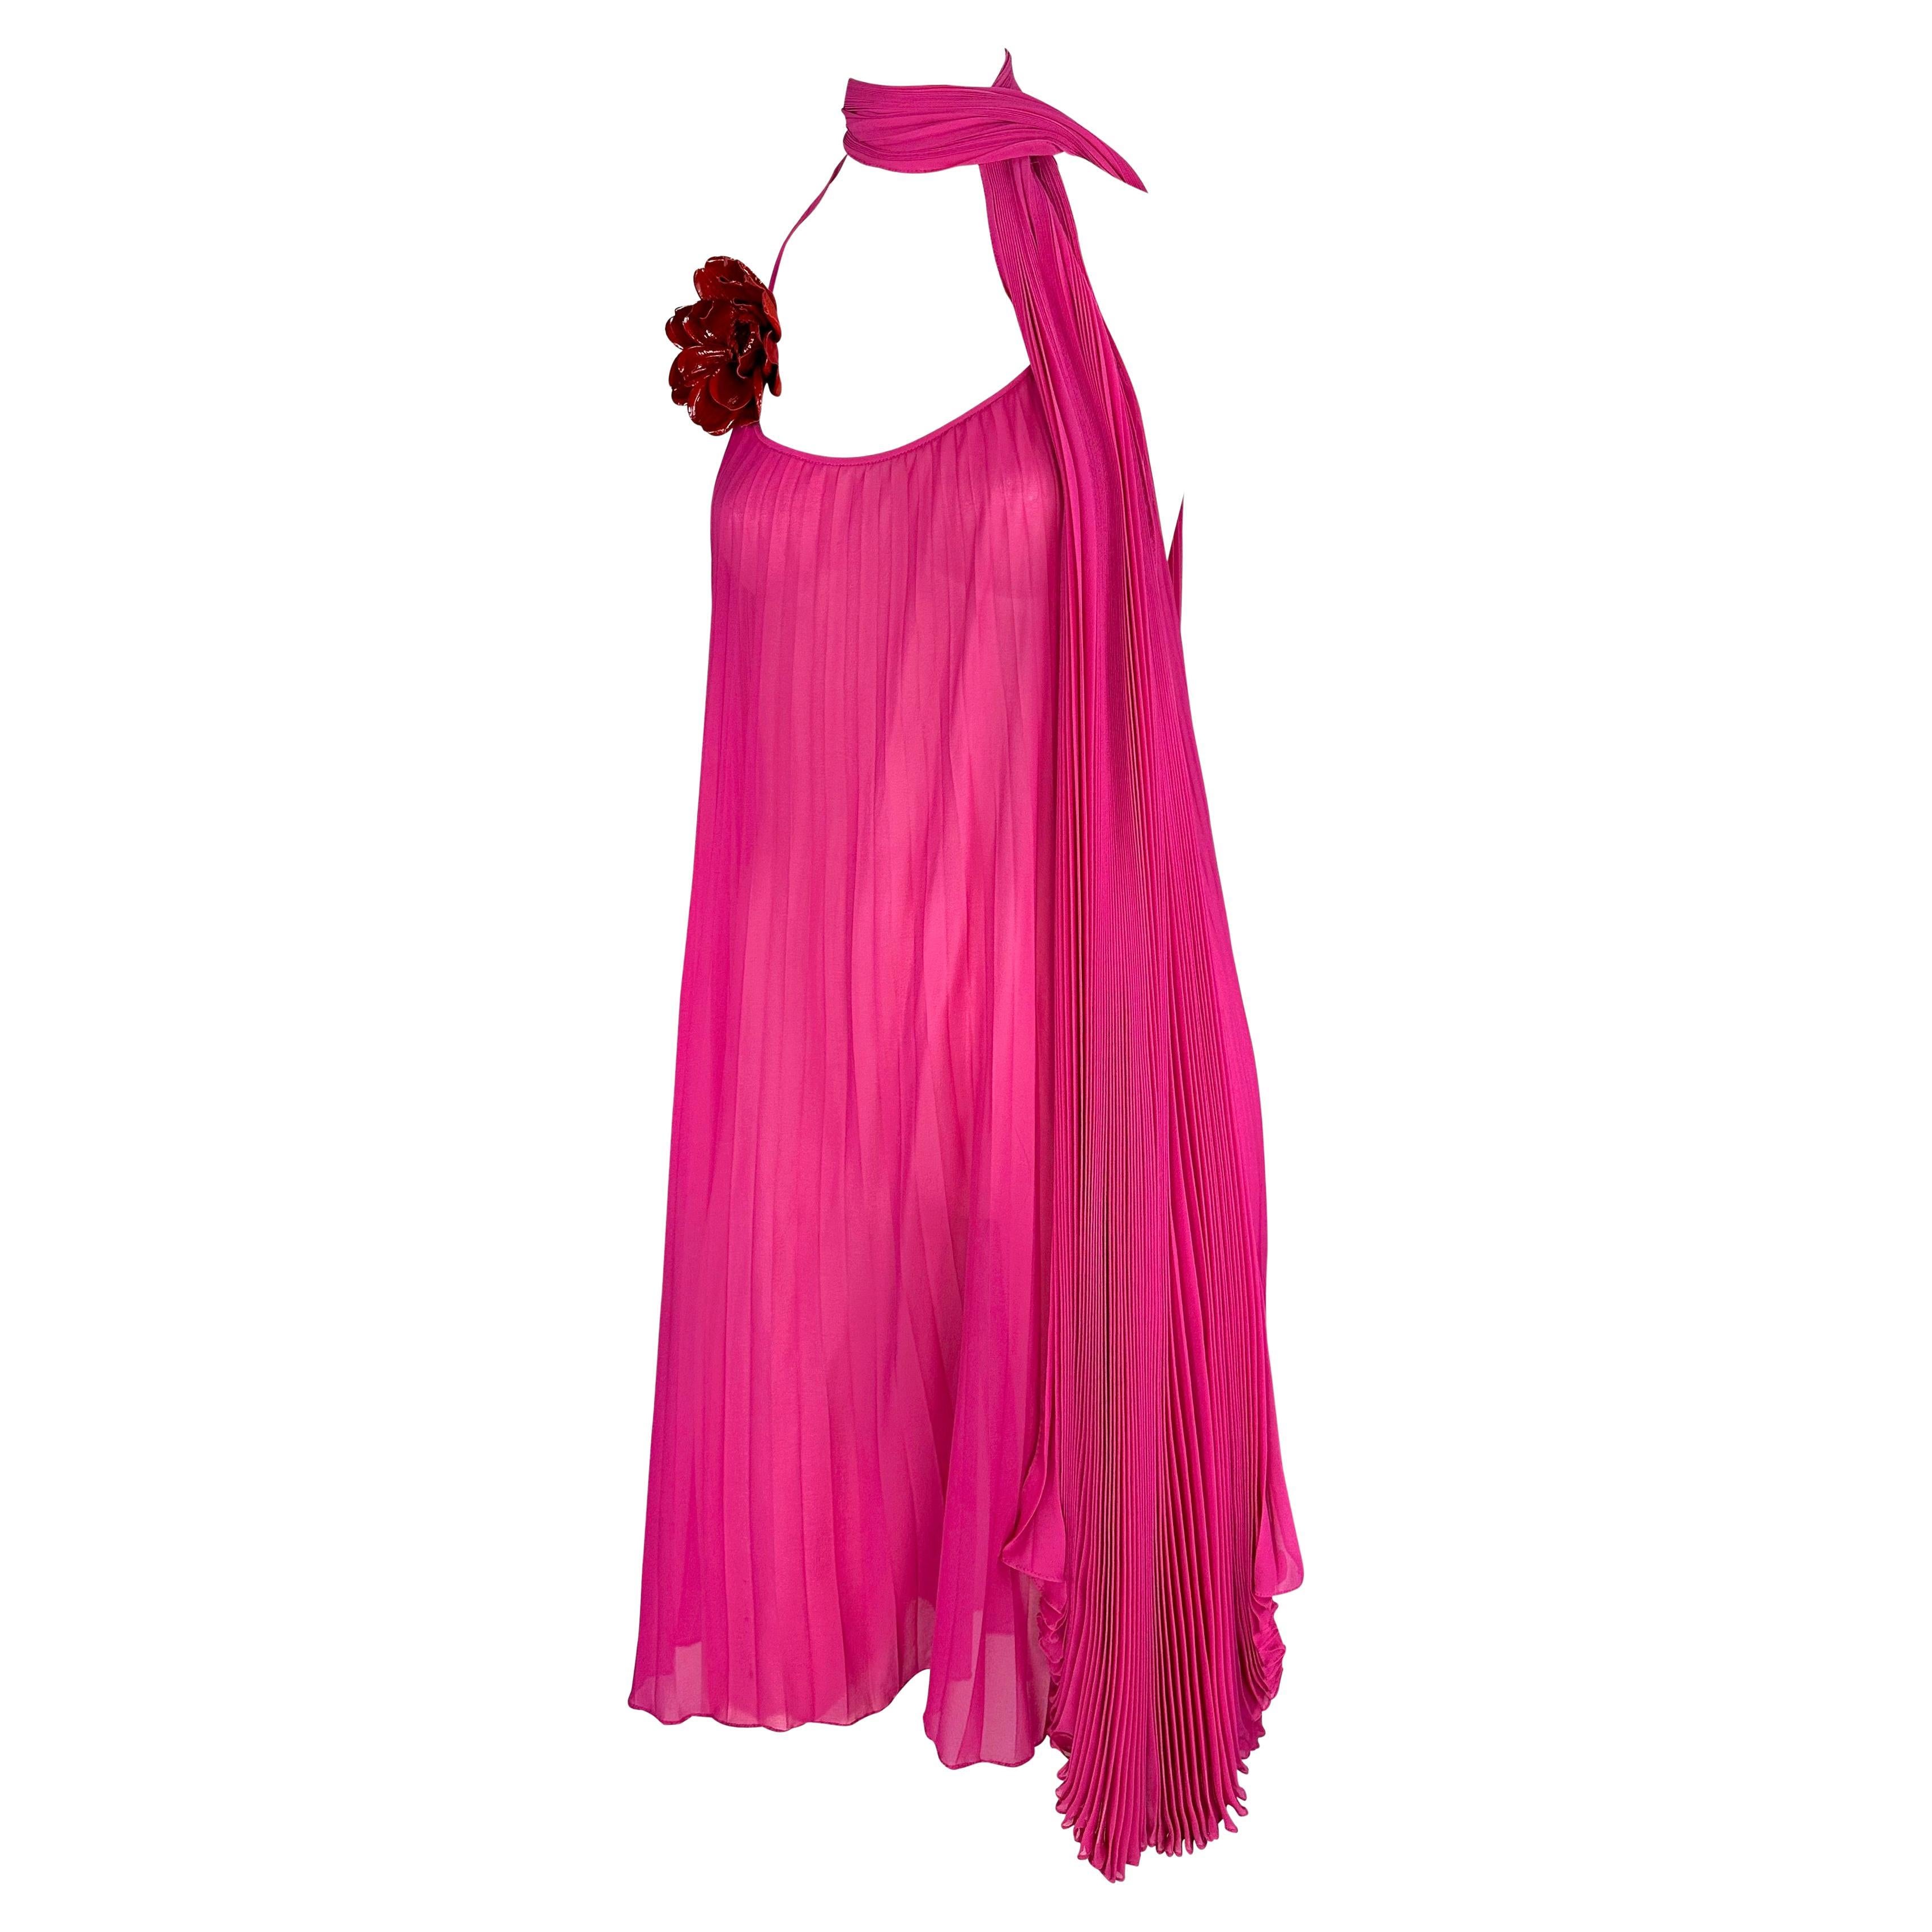 F/W 2000 Dolce & Gabbana Sheer Hot Pink Pleated Chiffon Floral Appliqué Dress For Sale 1